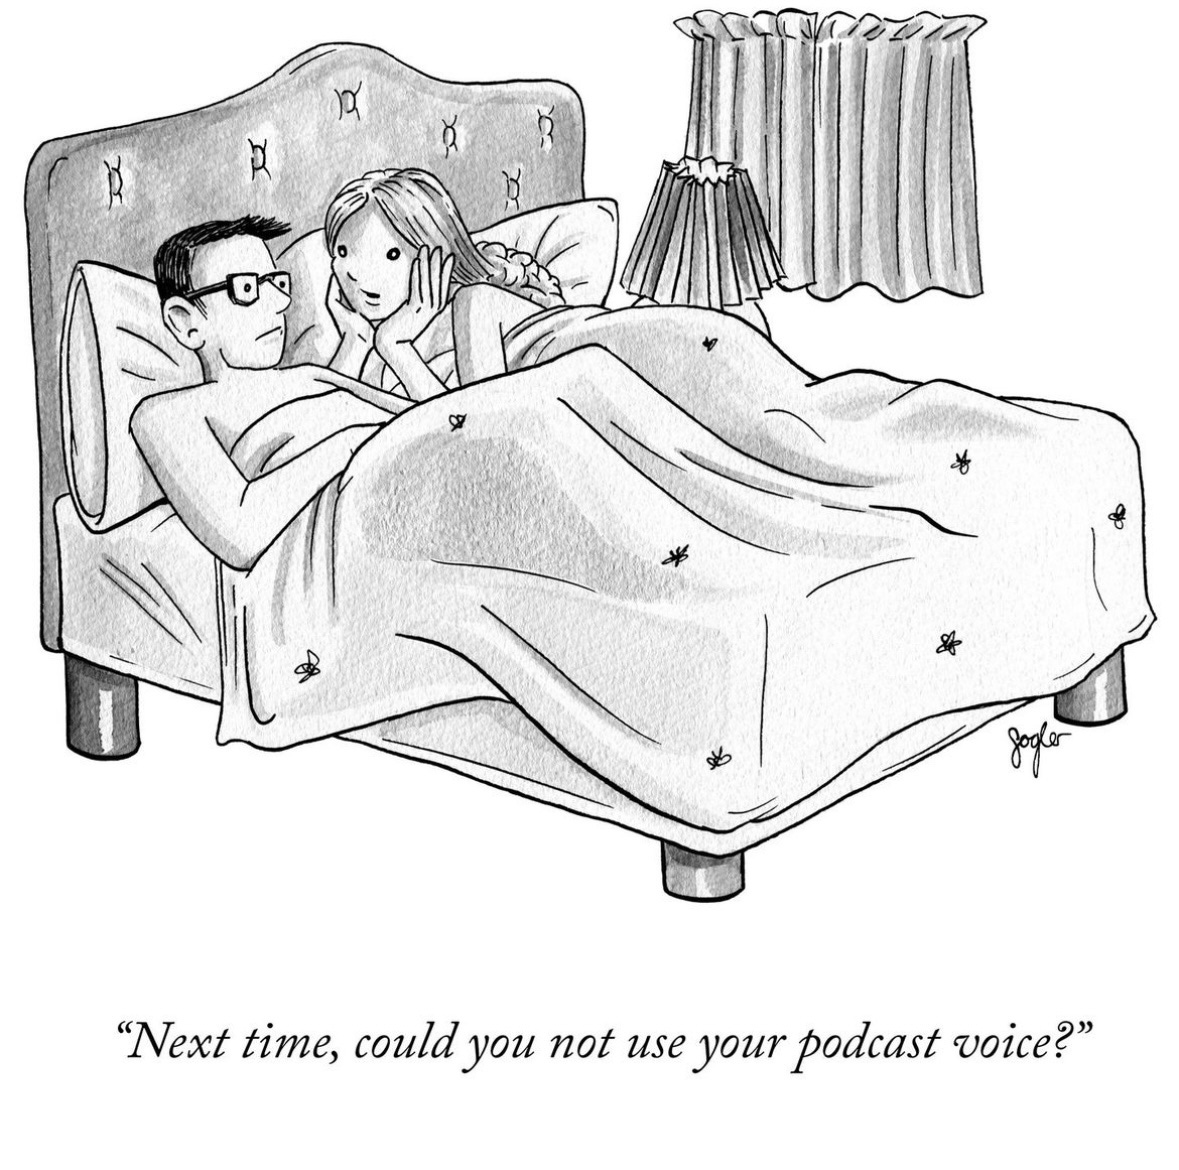 new yorker cartoon. "Next time, could you not use your podcast voice?"